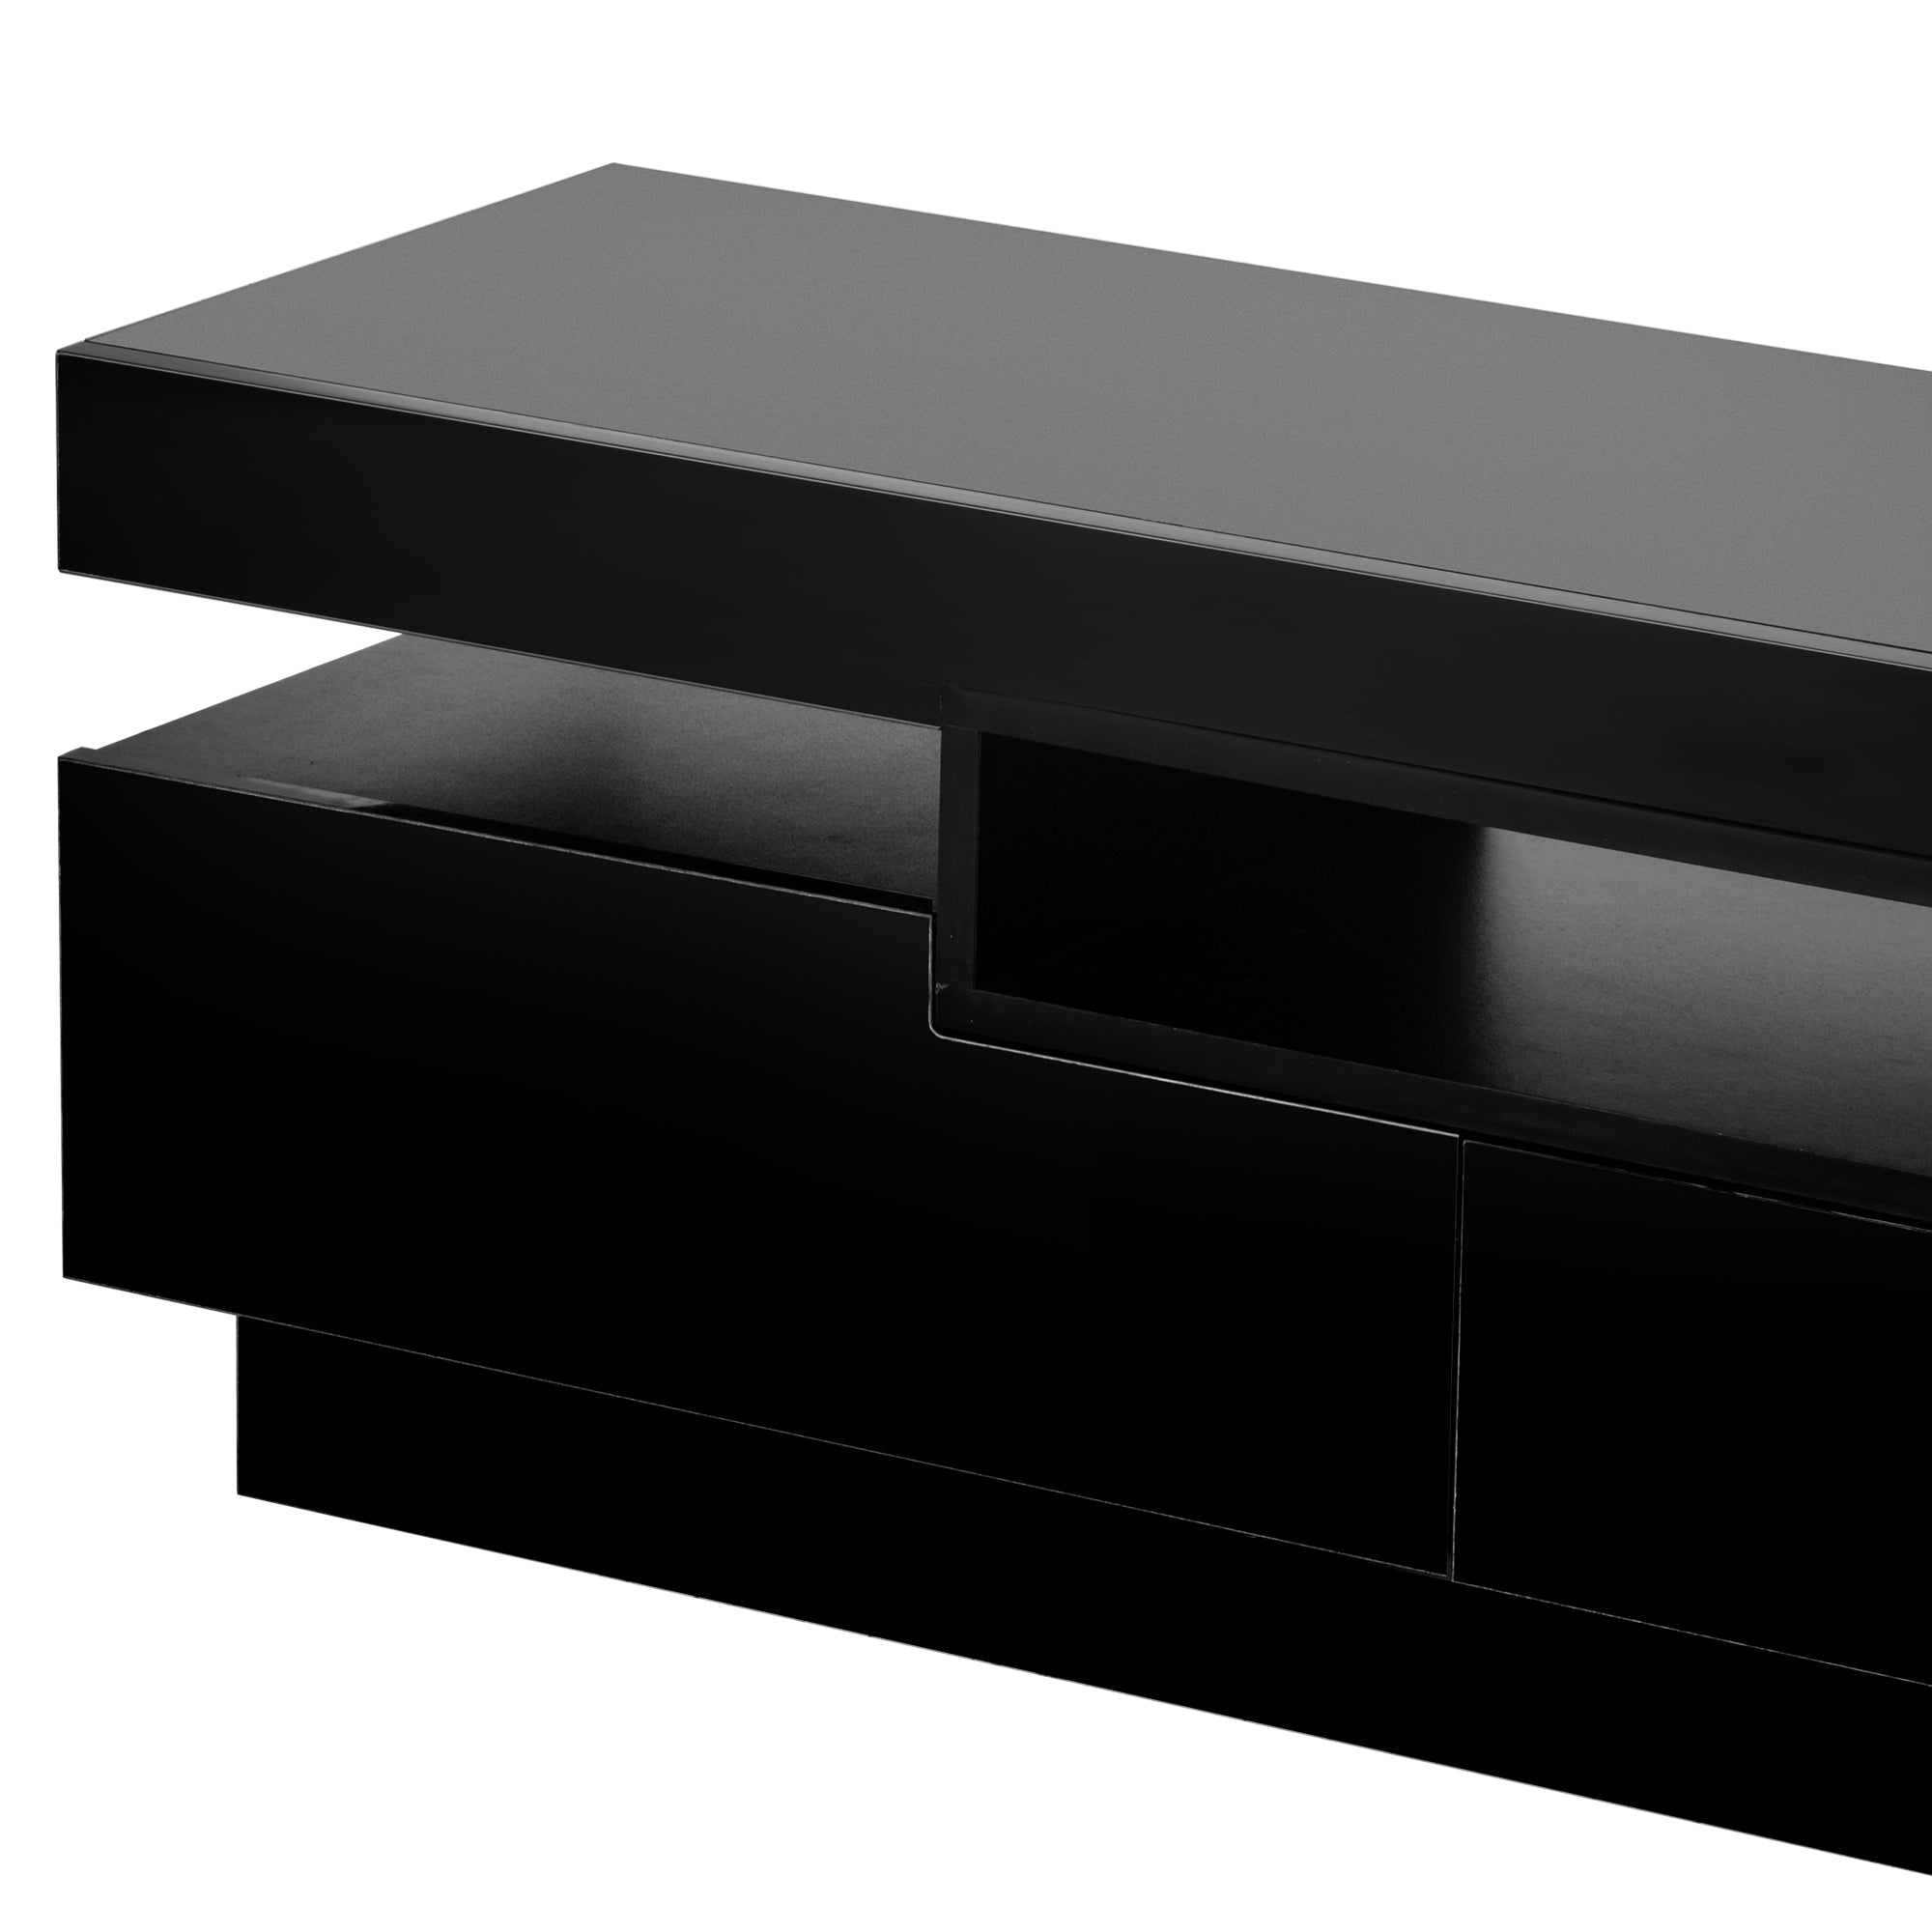 67" Black High Gloss Modern TV Stand With Storage and LED Light, Fits TV up to 75"